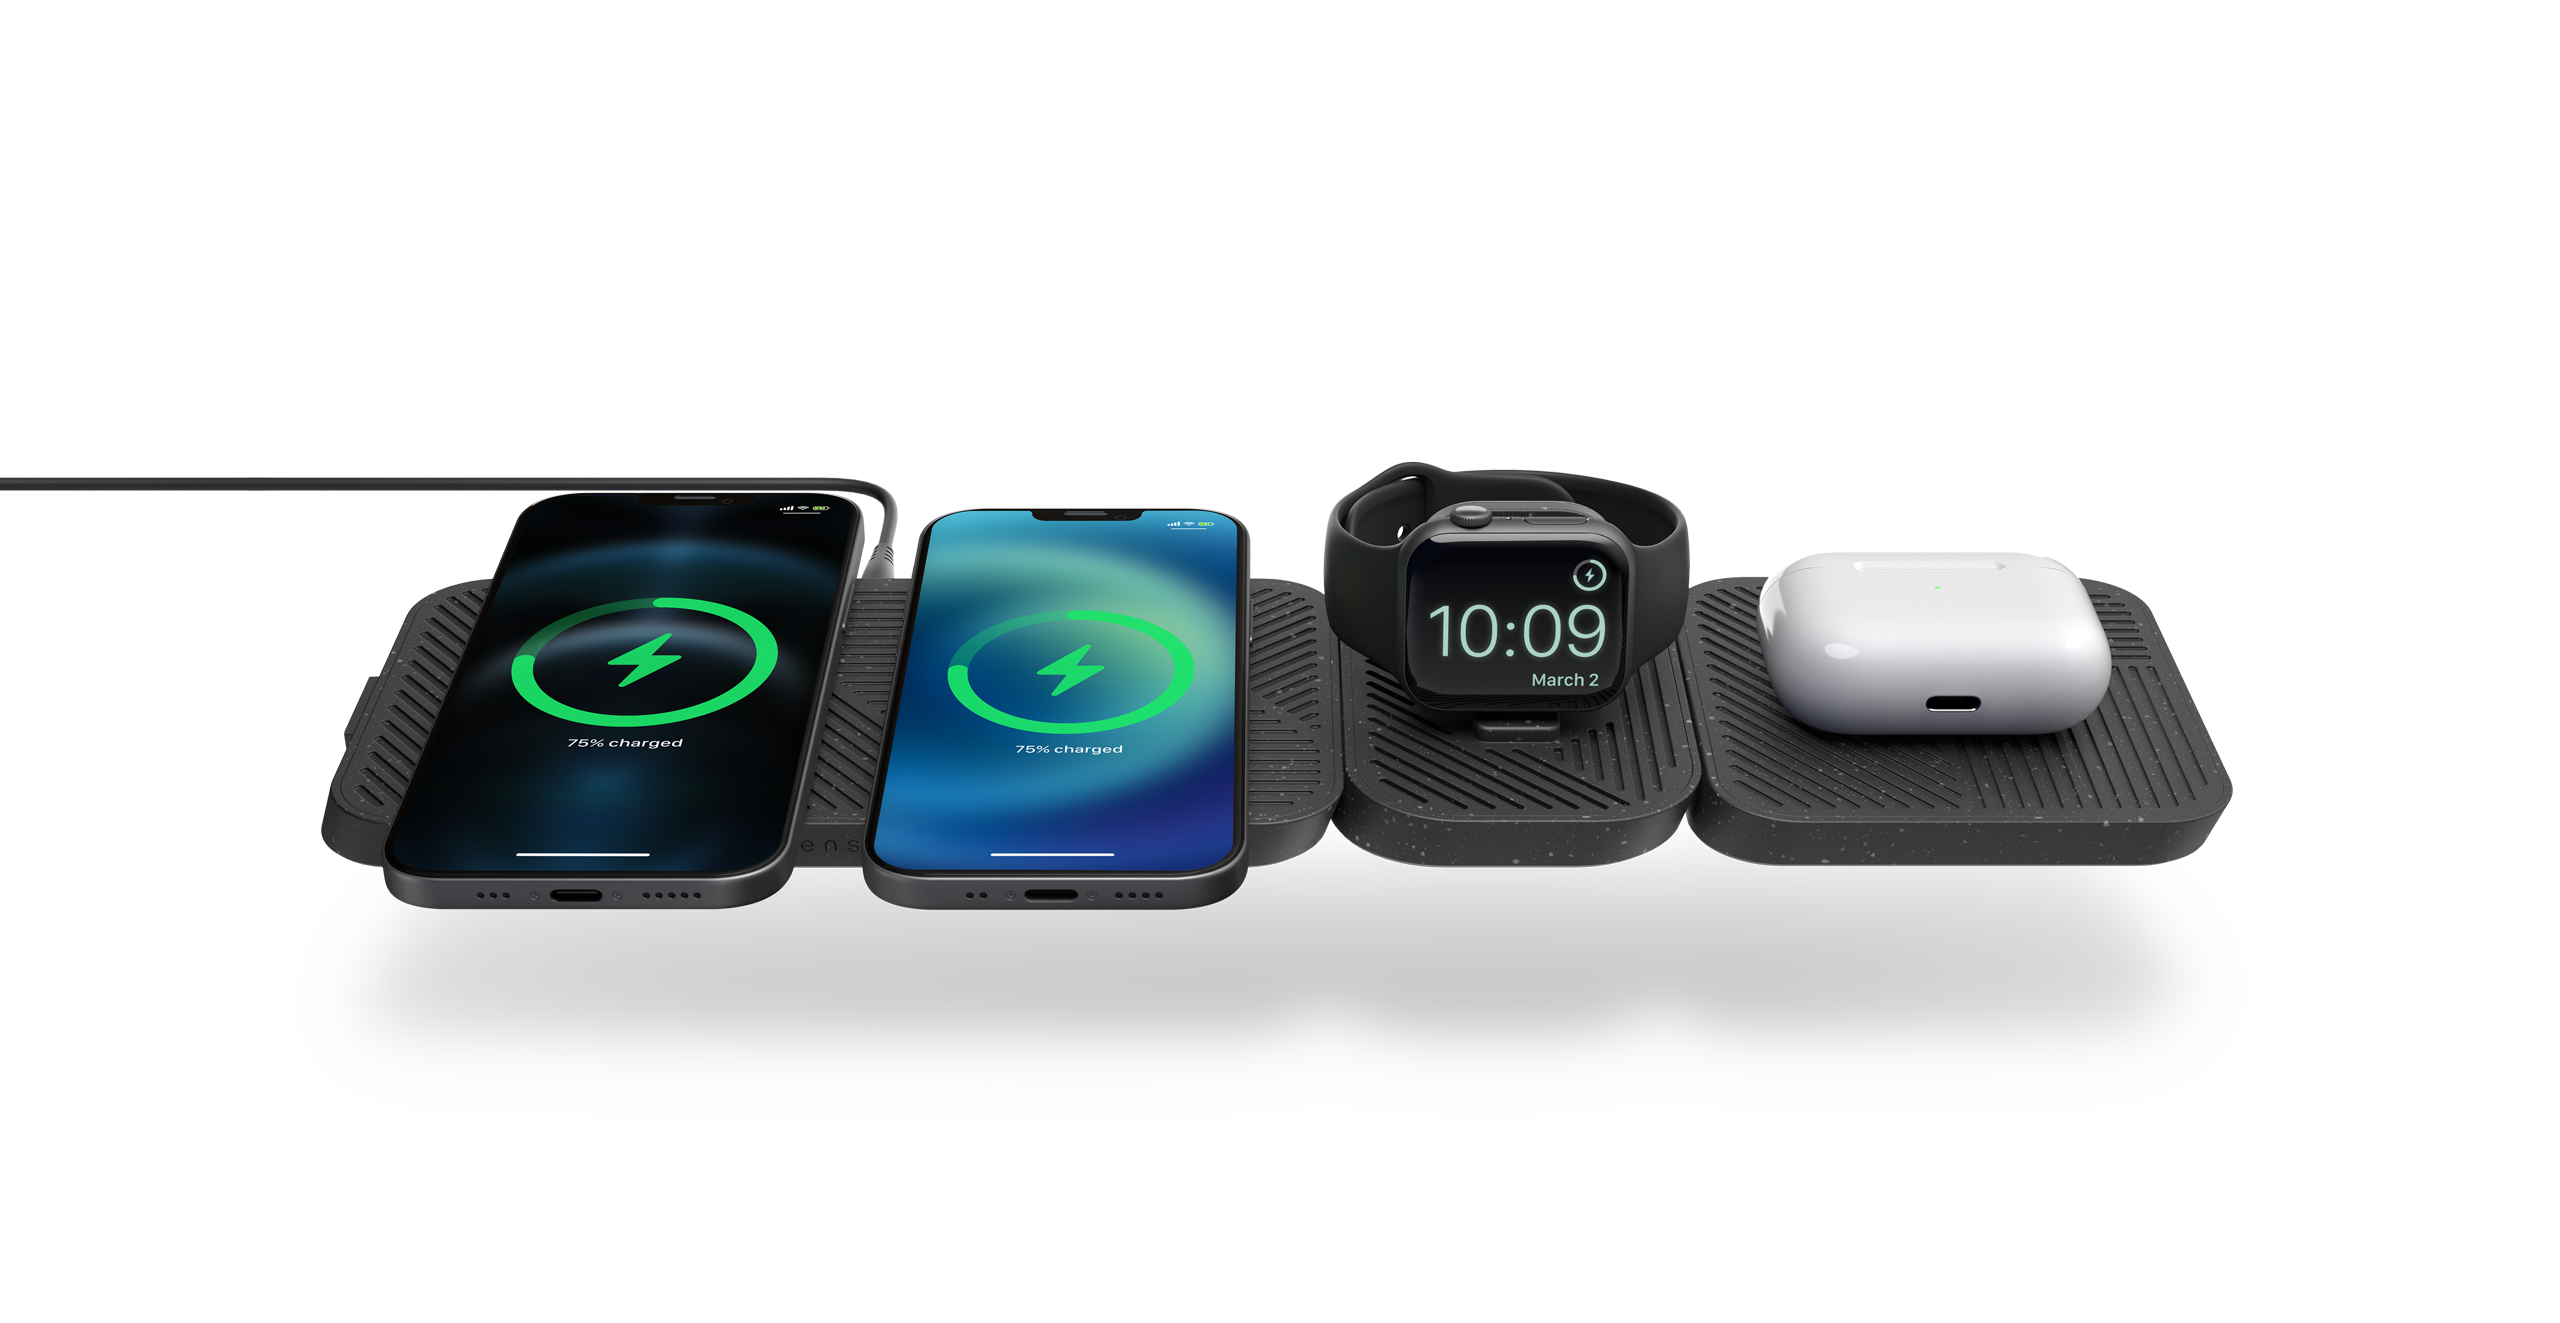 Modular Product Features phones, apples watch and airpods